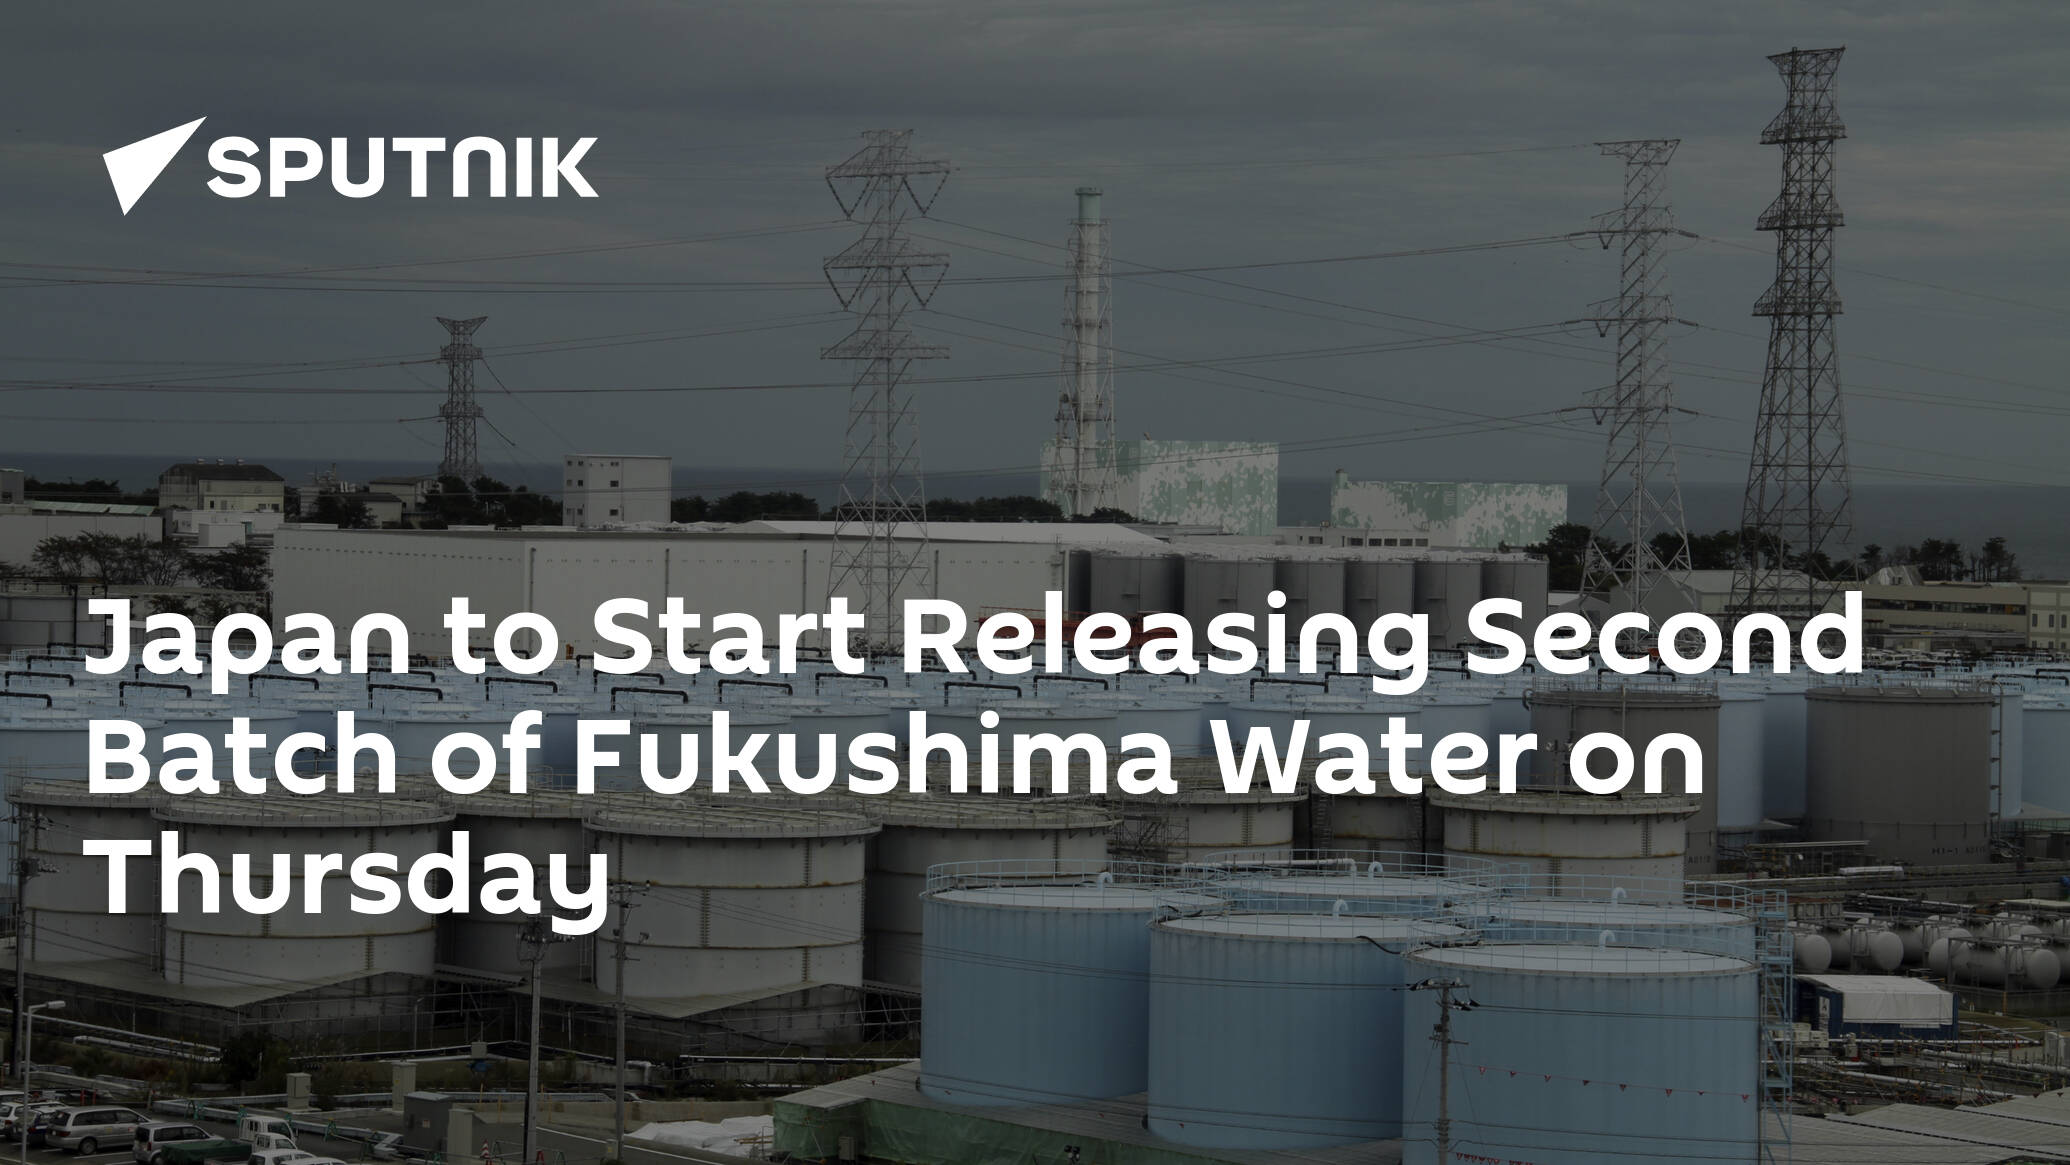 Japan to Start Releasing Second Batch of Fukushima Water on Thursday